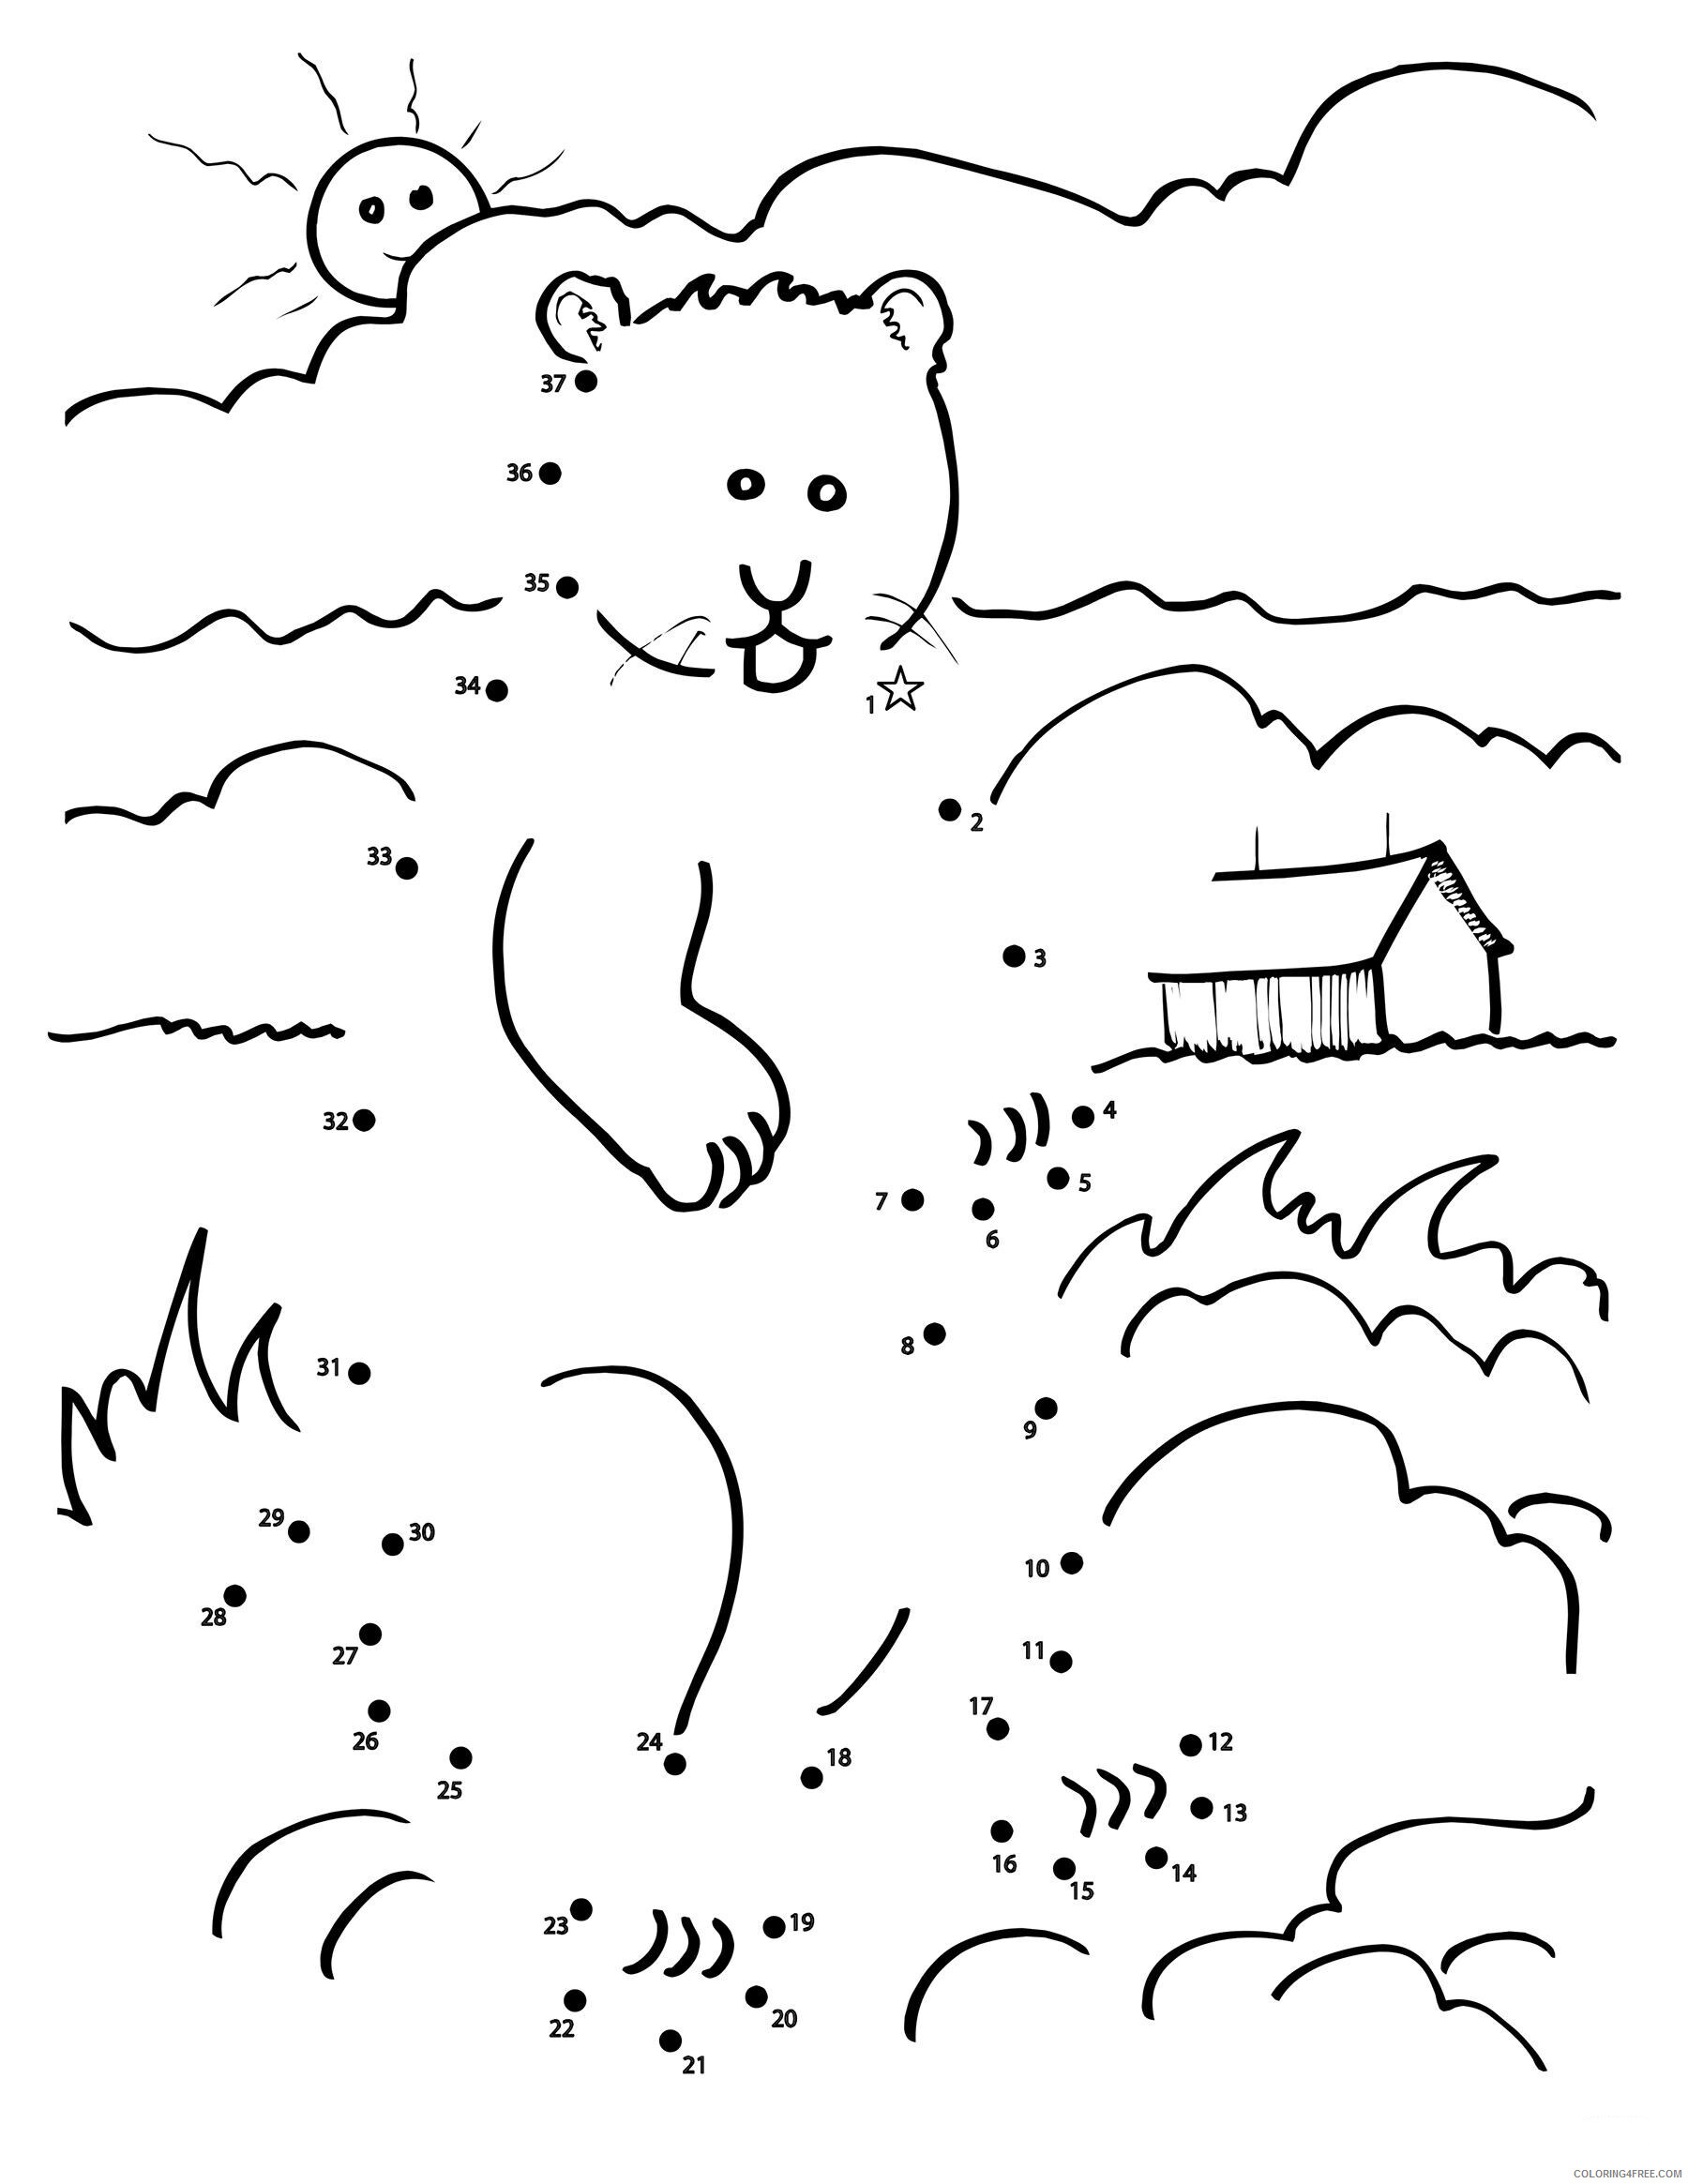 Groundhog Day Coloring Pages Holiday Groundhog Day Connect the Dot Worksheets Printable 2021 0581 Coloring4free